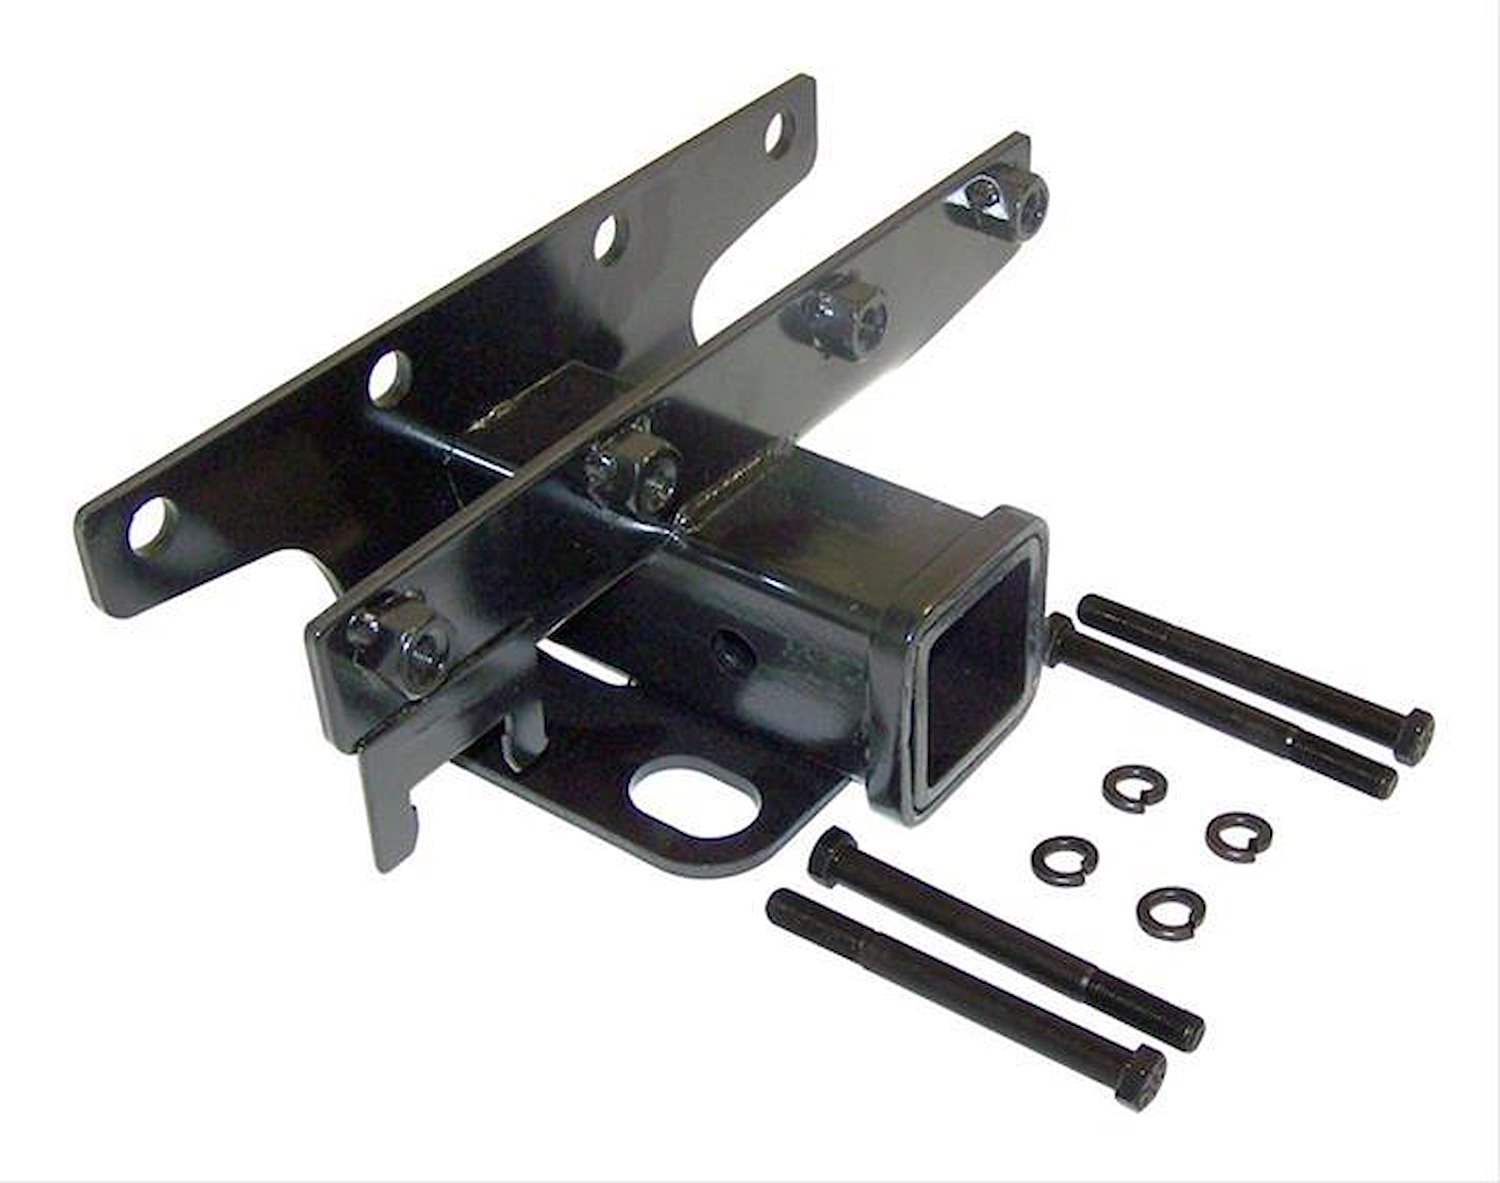 52060290K Trailer Hitch Kit for 2007-2018 Jeep JK Wrangler w/ 2" Receiver Hitch; Incl Hardware